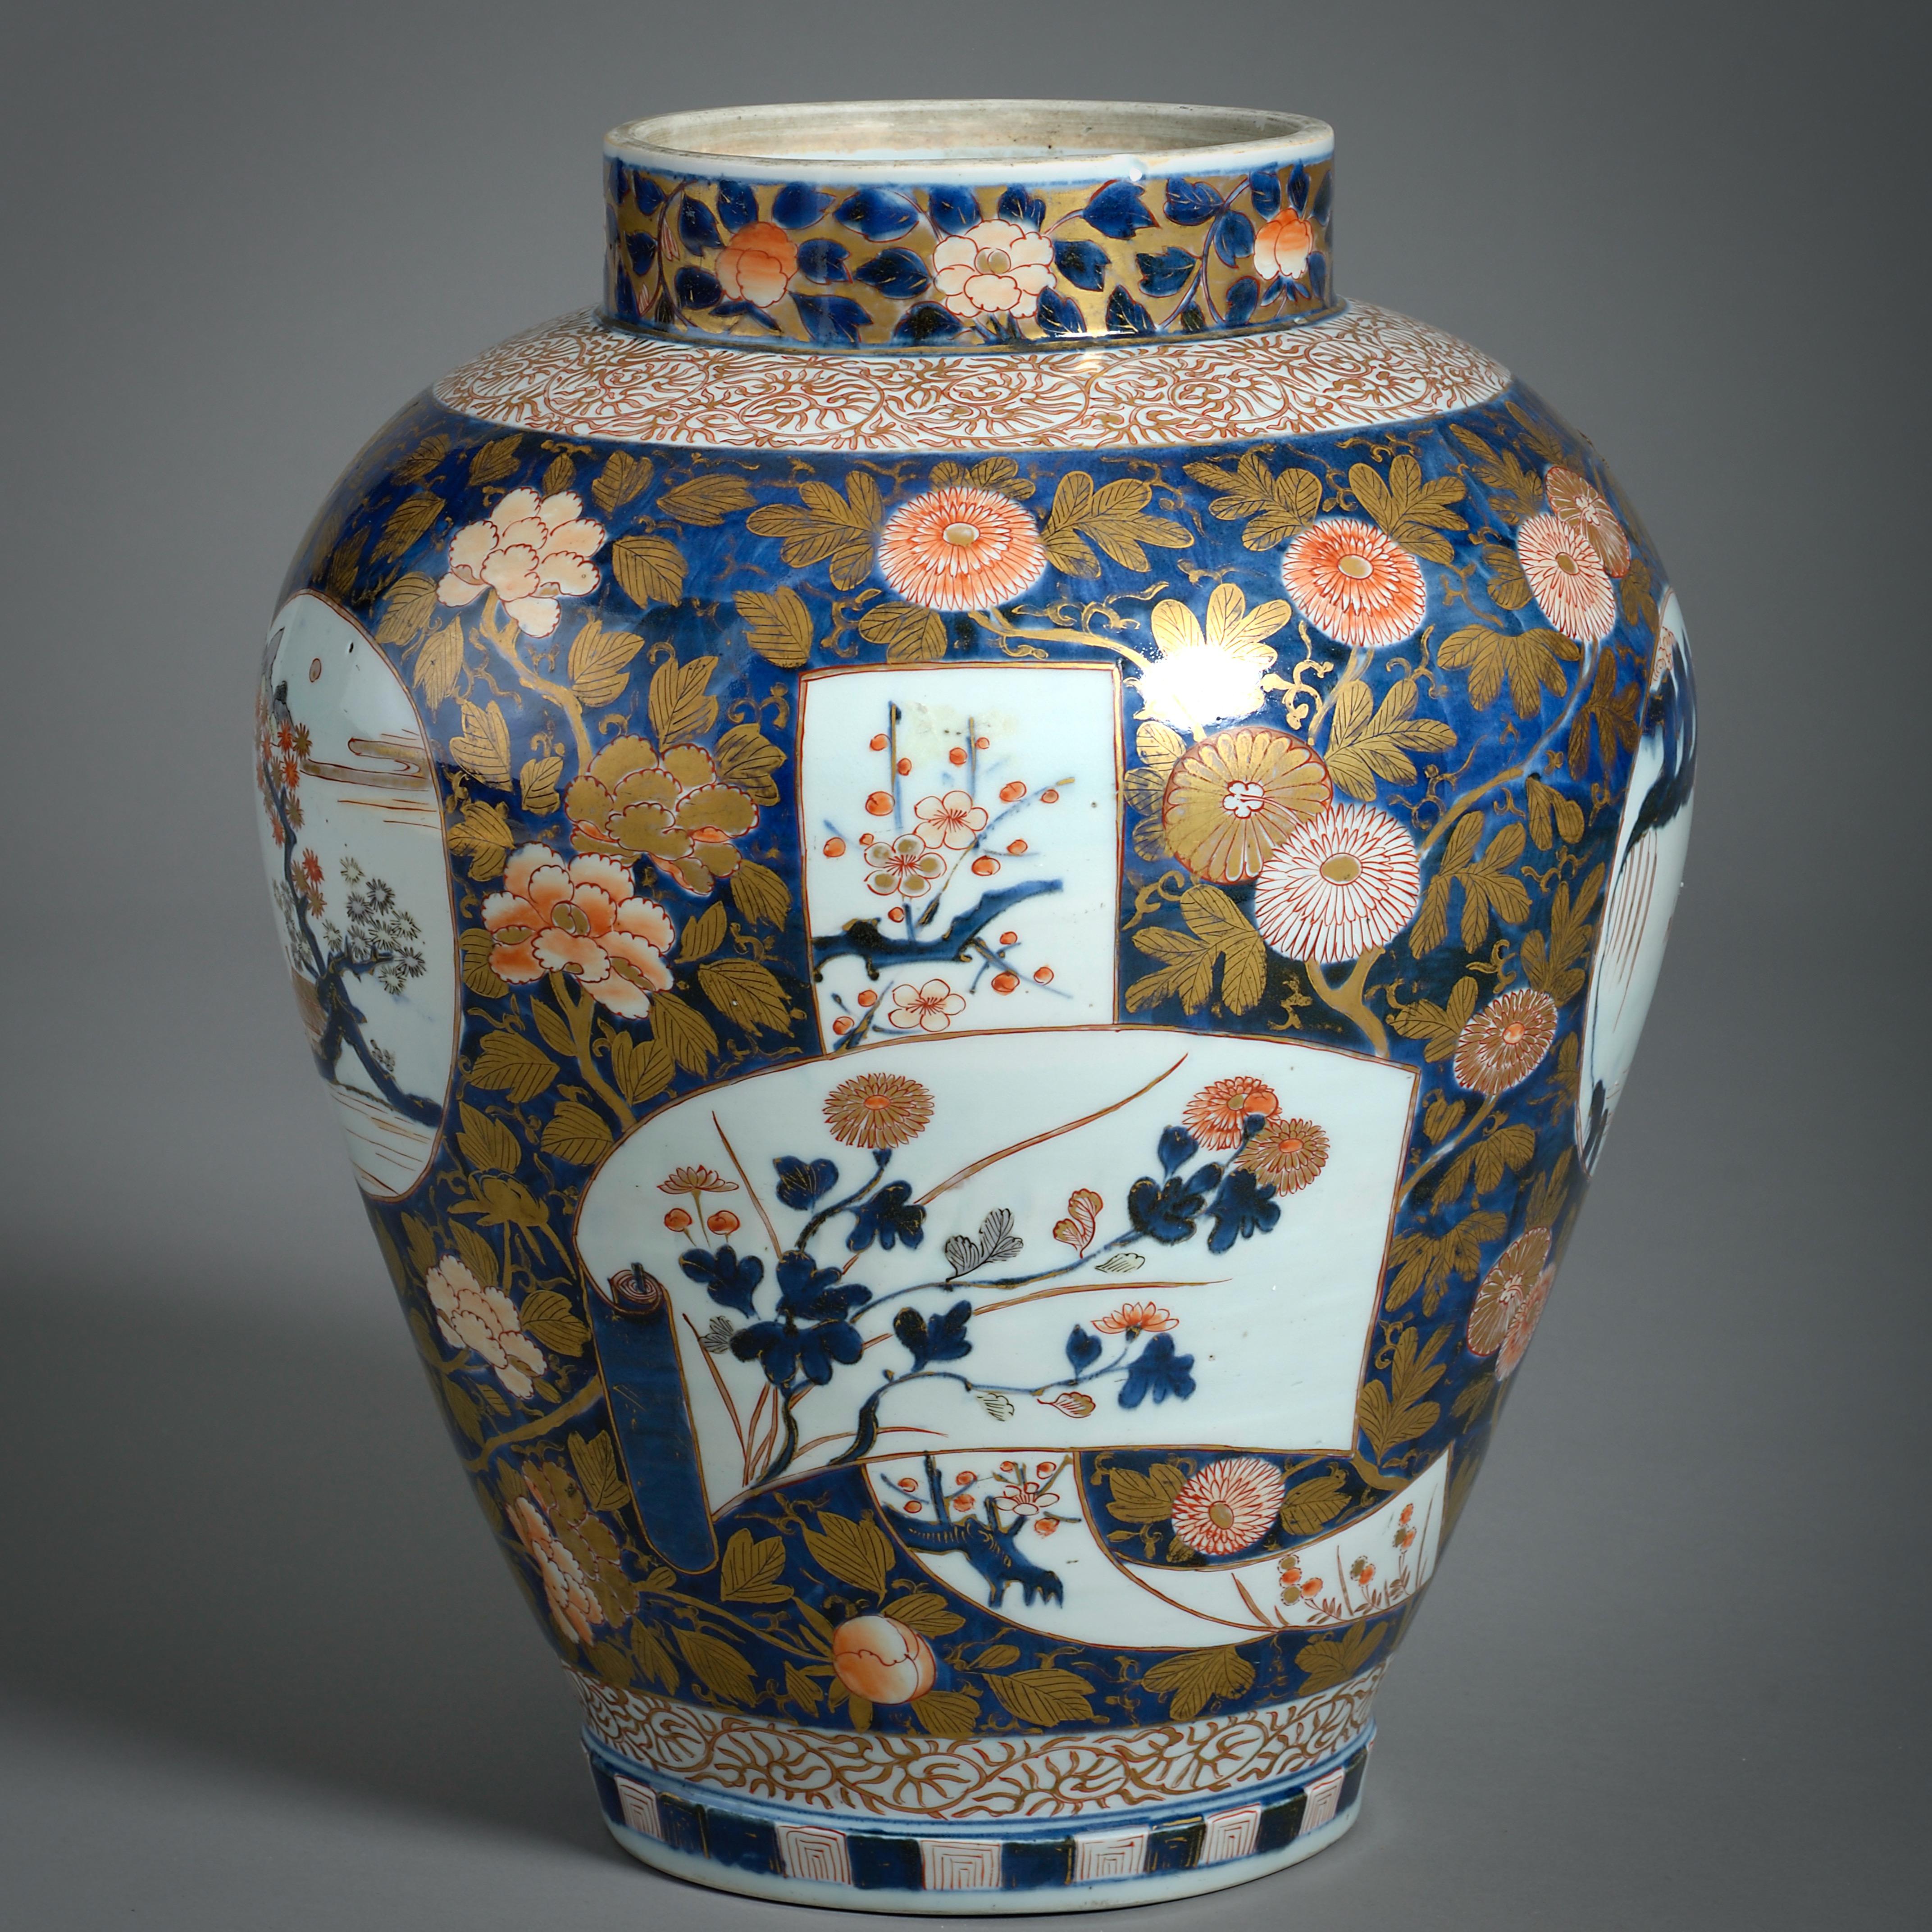 A fine Japanese Imari vase decorated with flowering branches framing paper scrolls and windows with views onto landscapes, circa 1700.